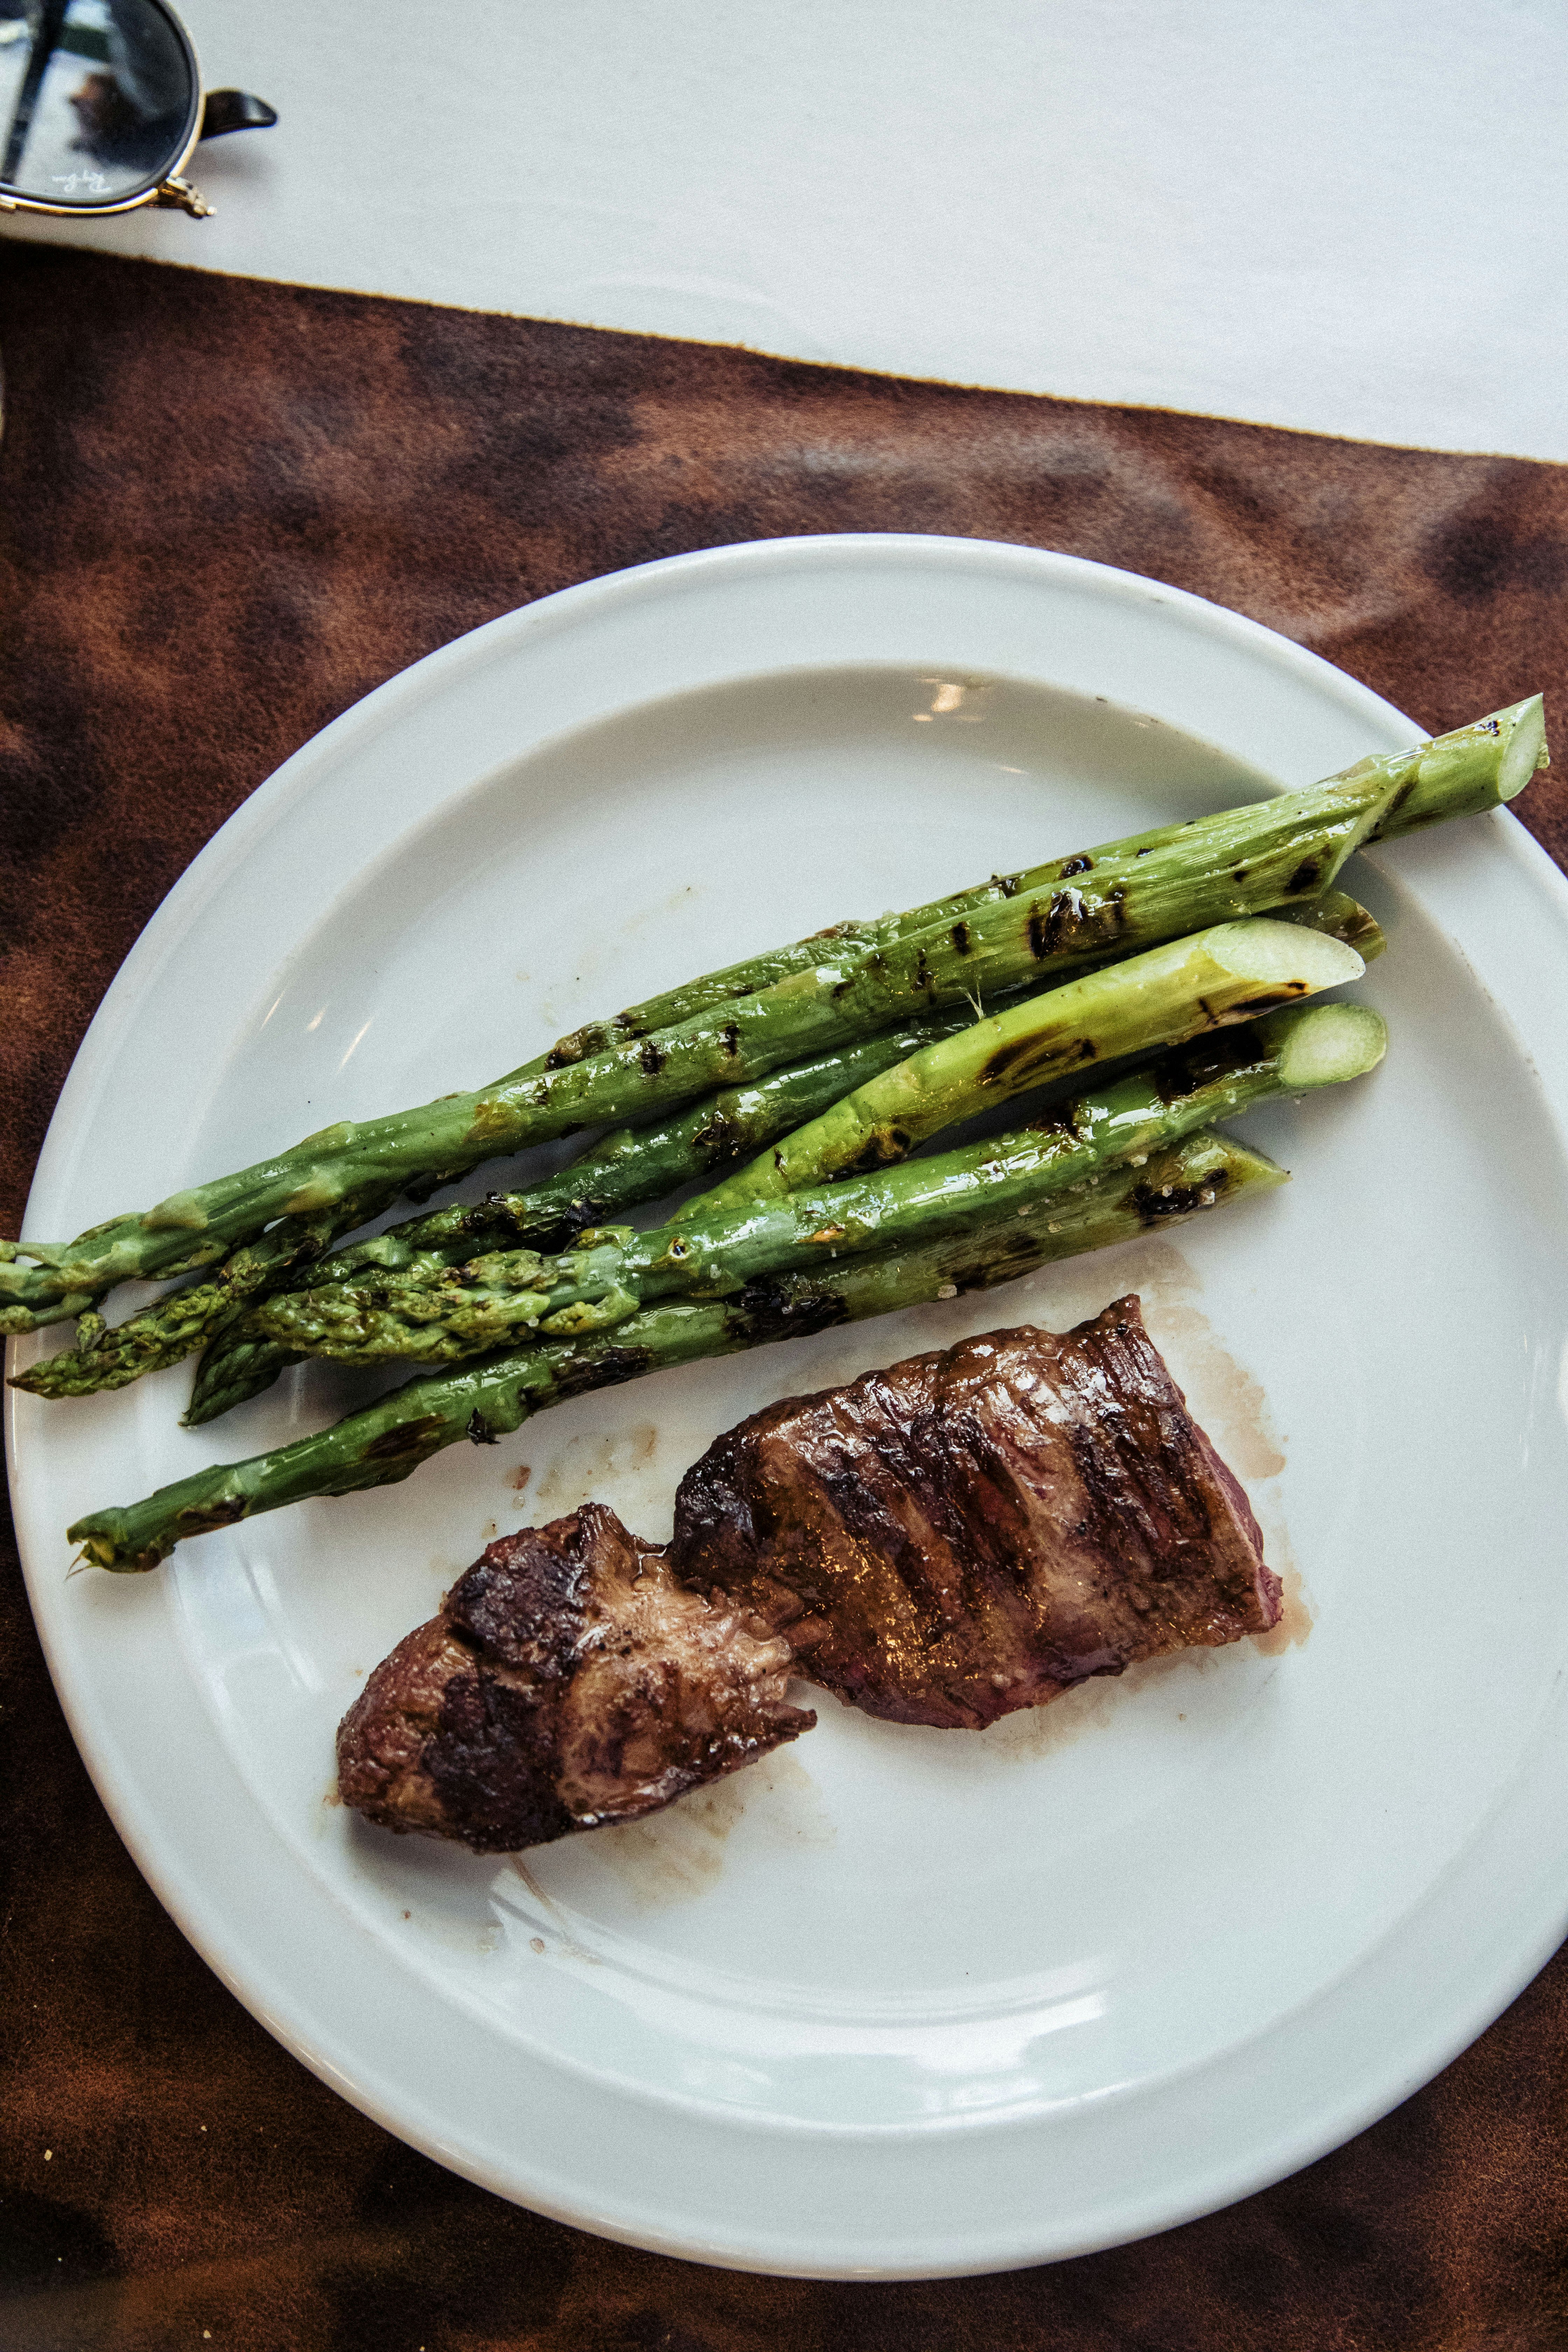 A cut of steak and a few stalks of asparagus on a white plate